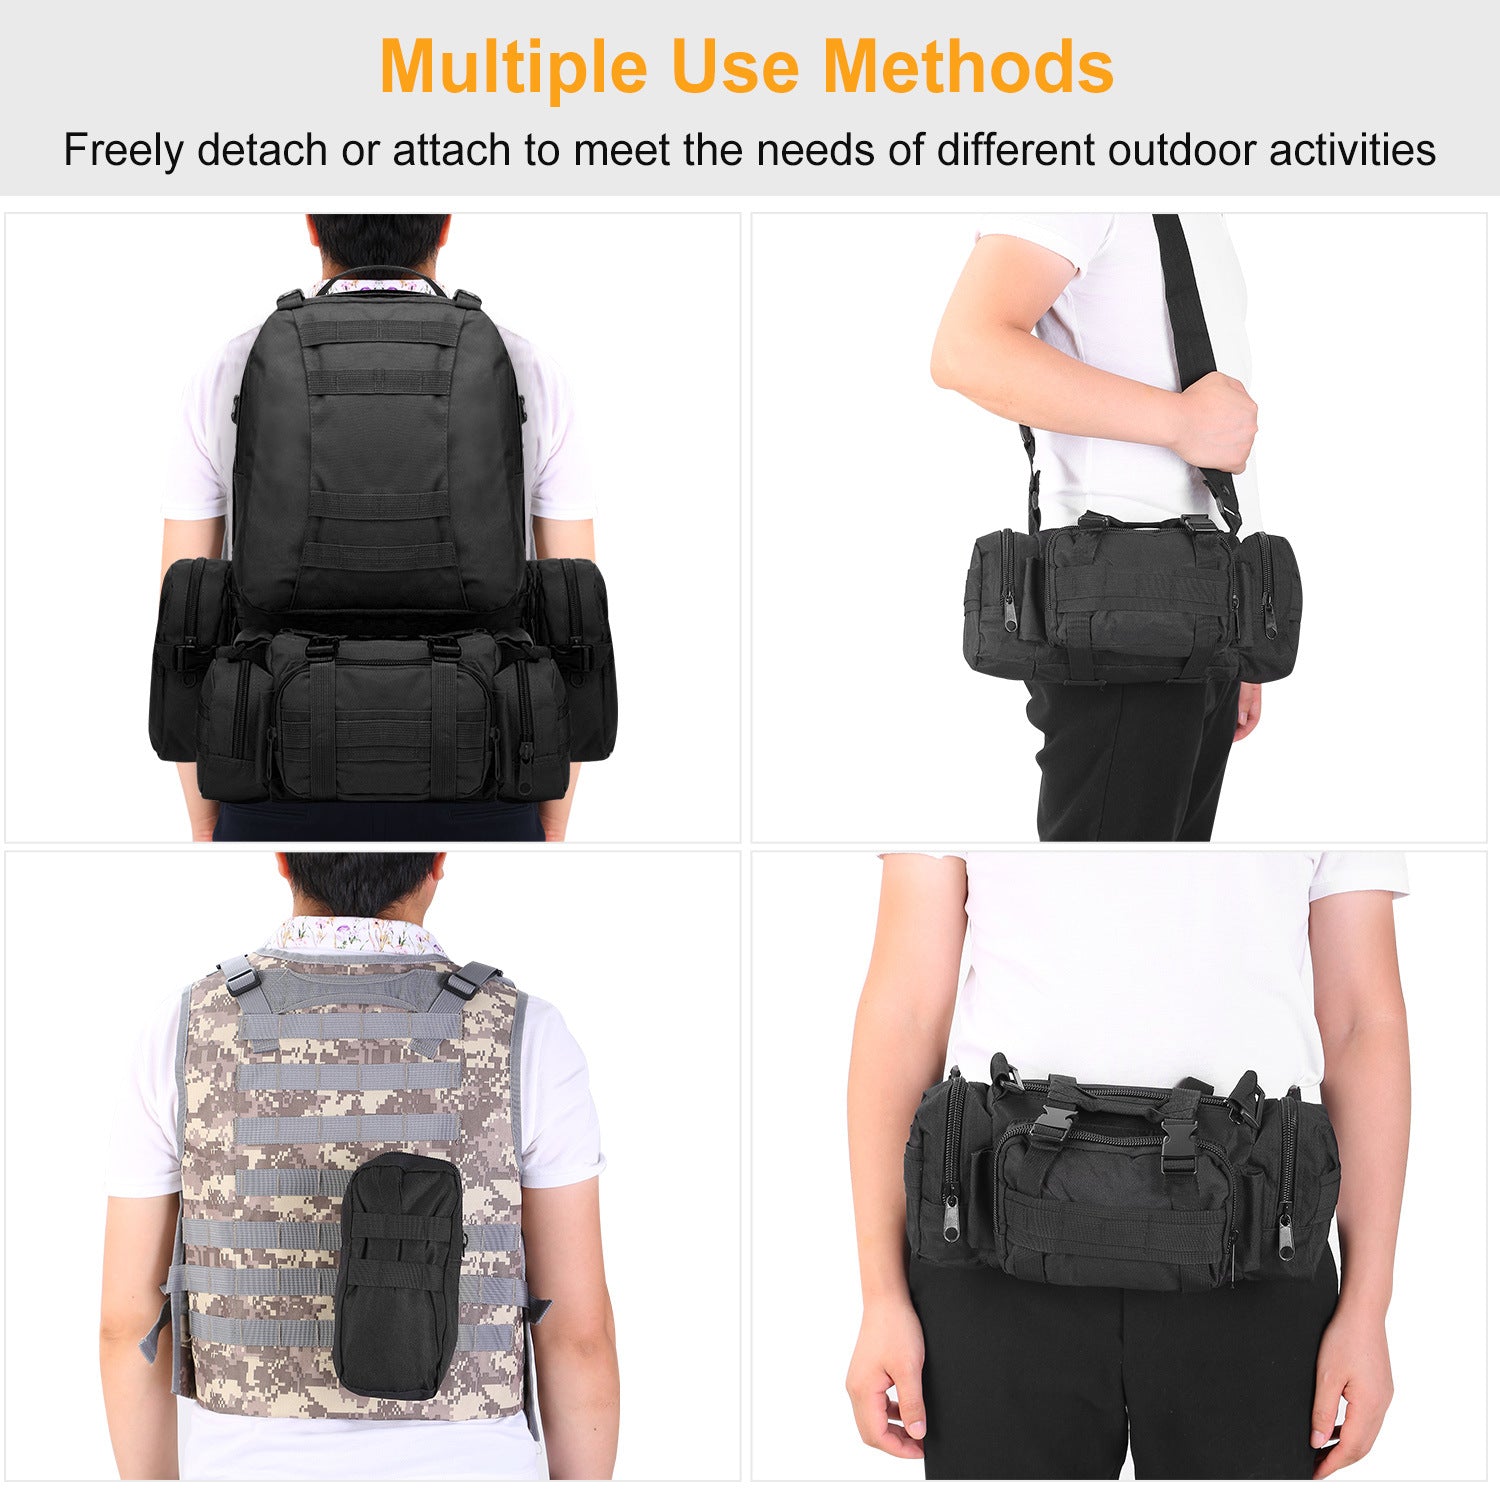 A 56L Military Tactical Backpack Rucksacks Army Assault Pack Combat Backpack Pouch with durable construction on a white background.